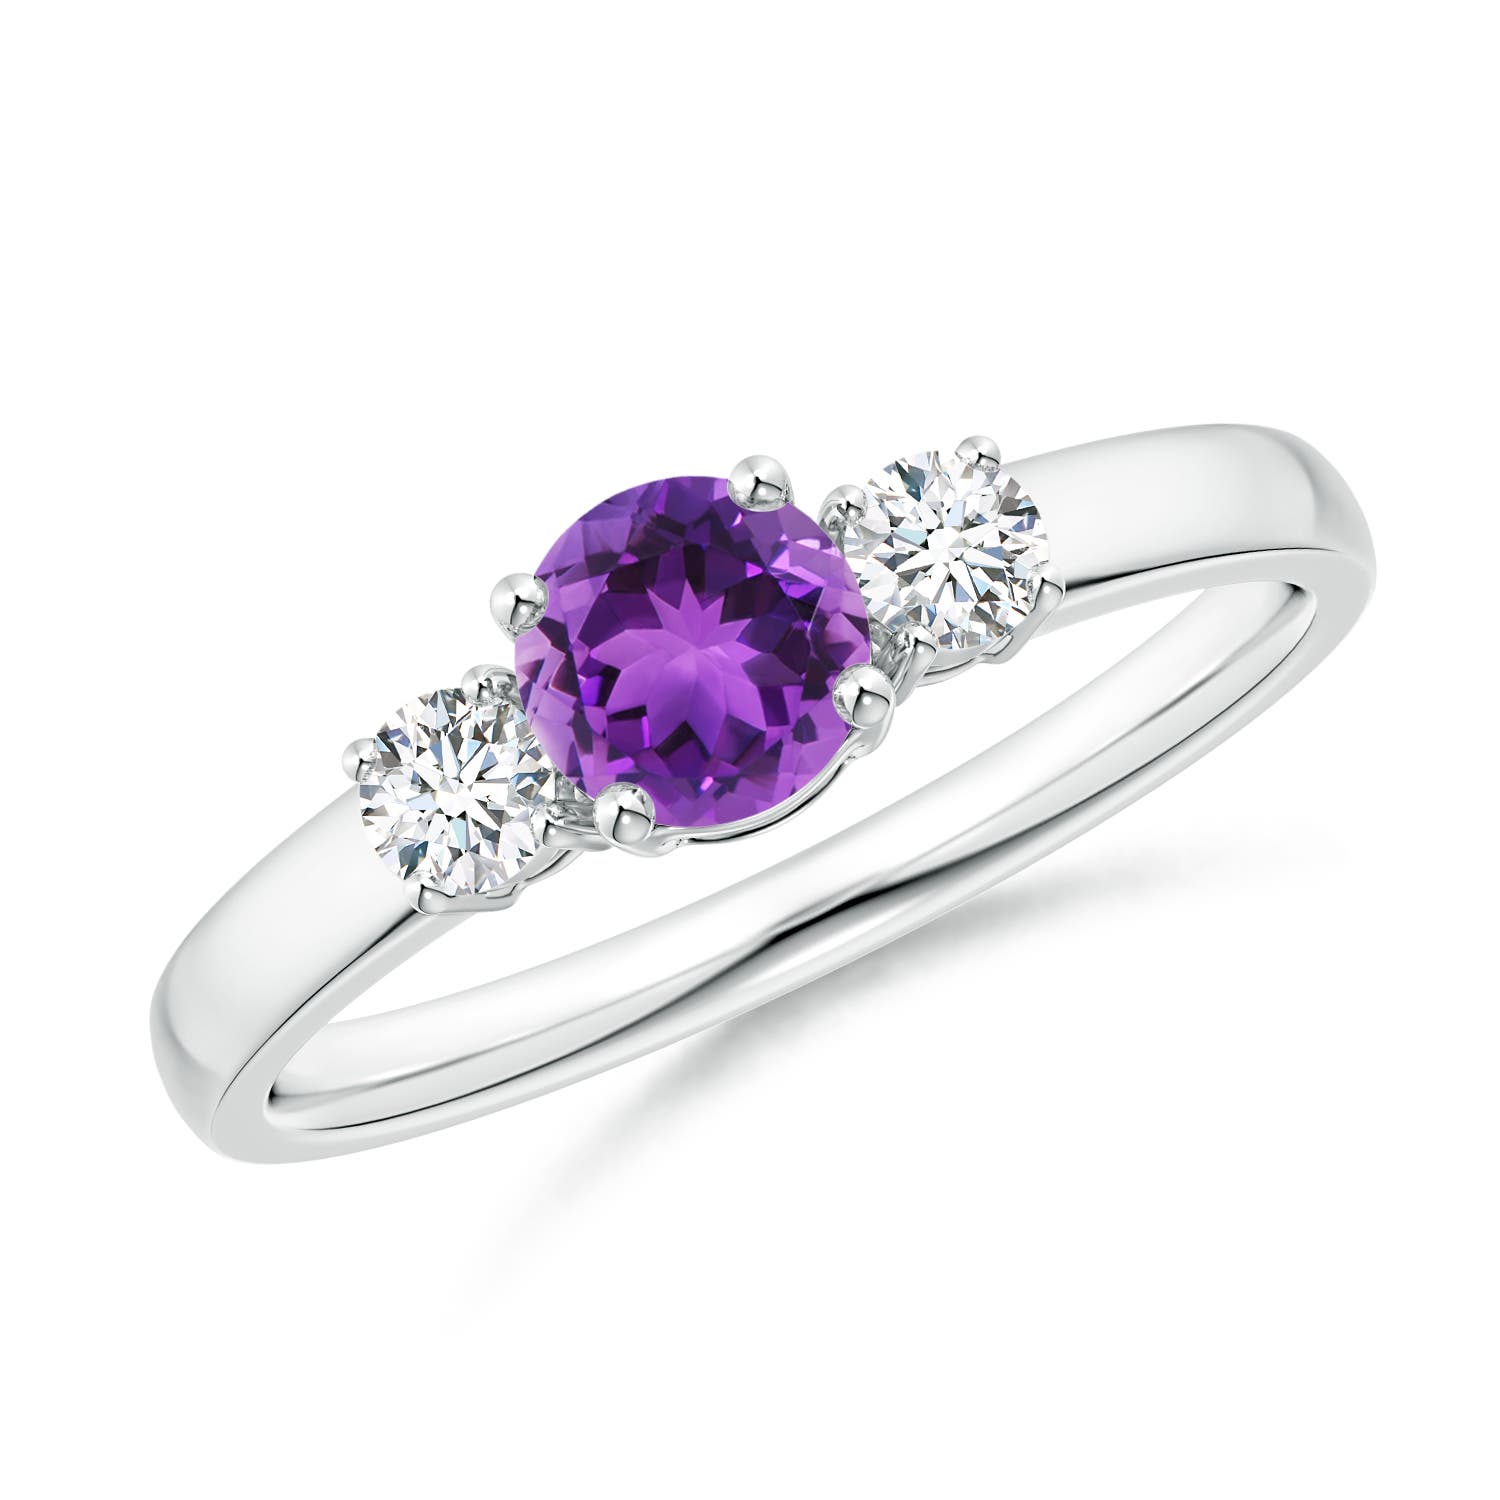 AAA - Amethyst / 0.66 CT / 14 KT White Gold